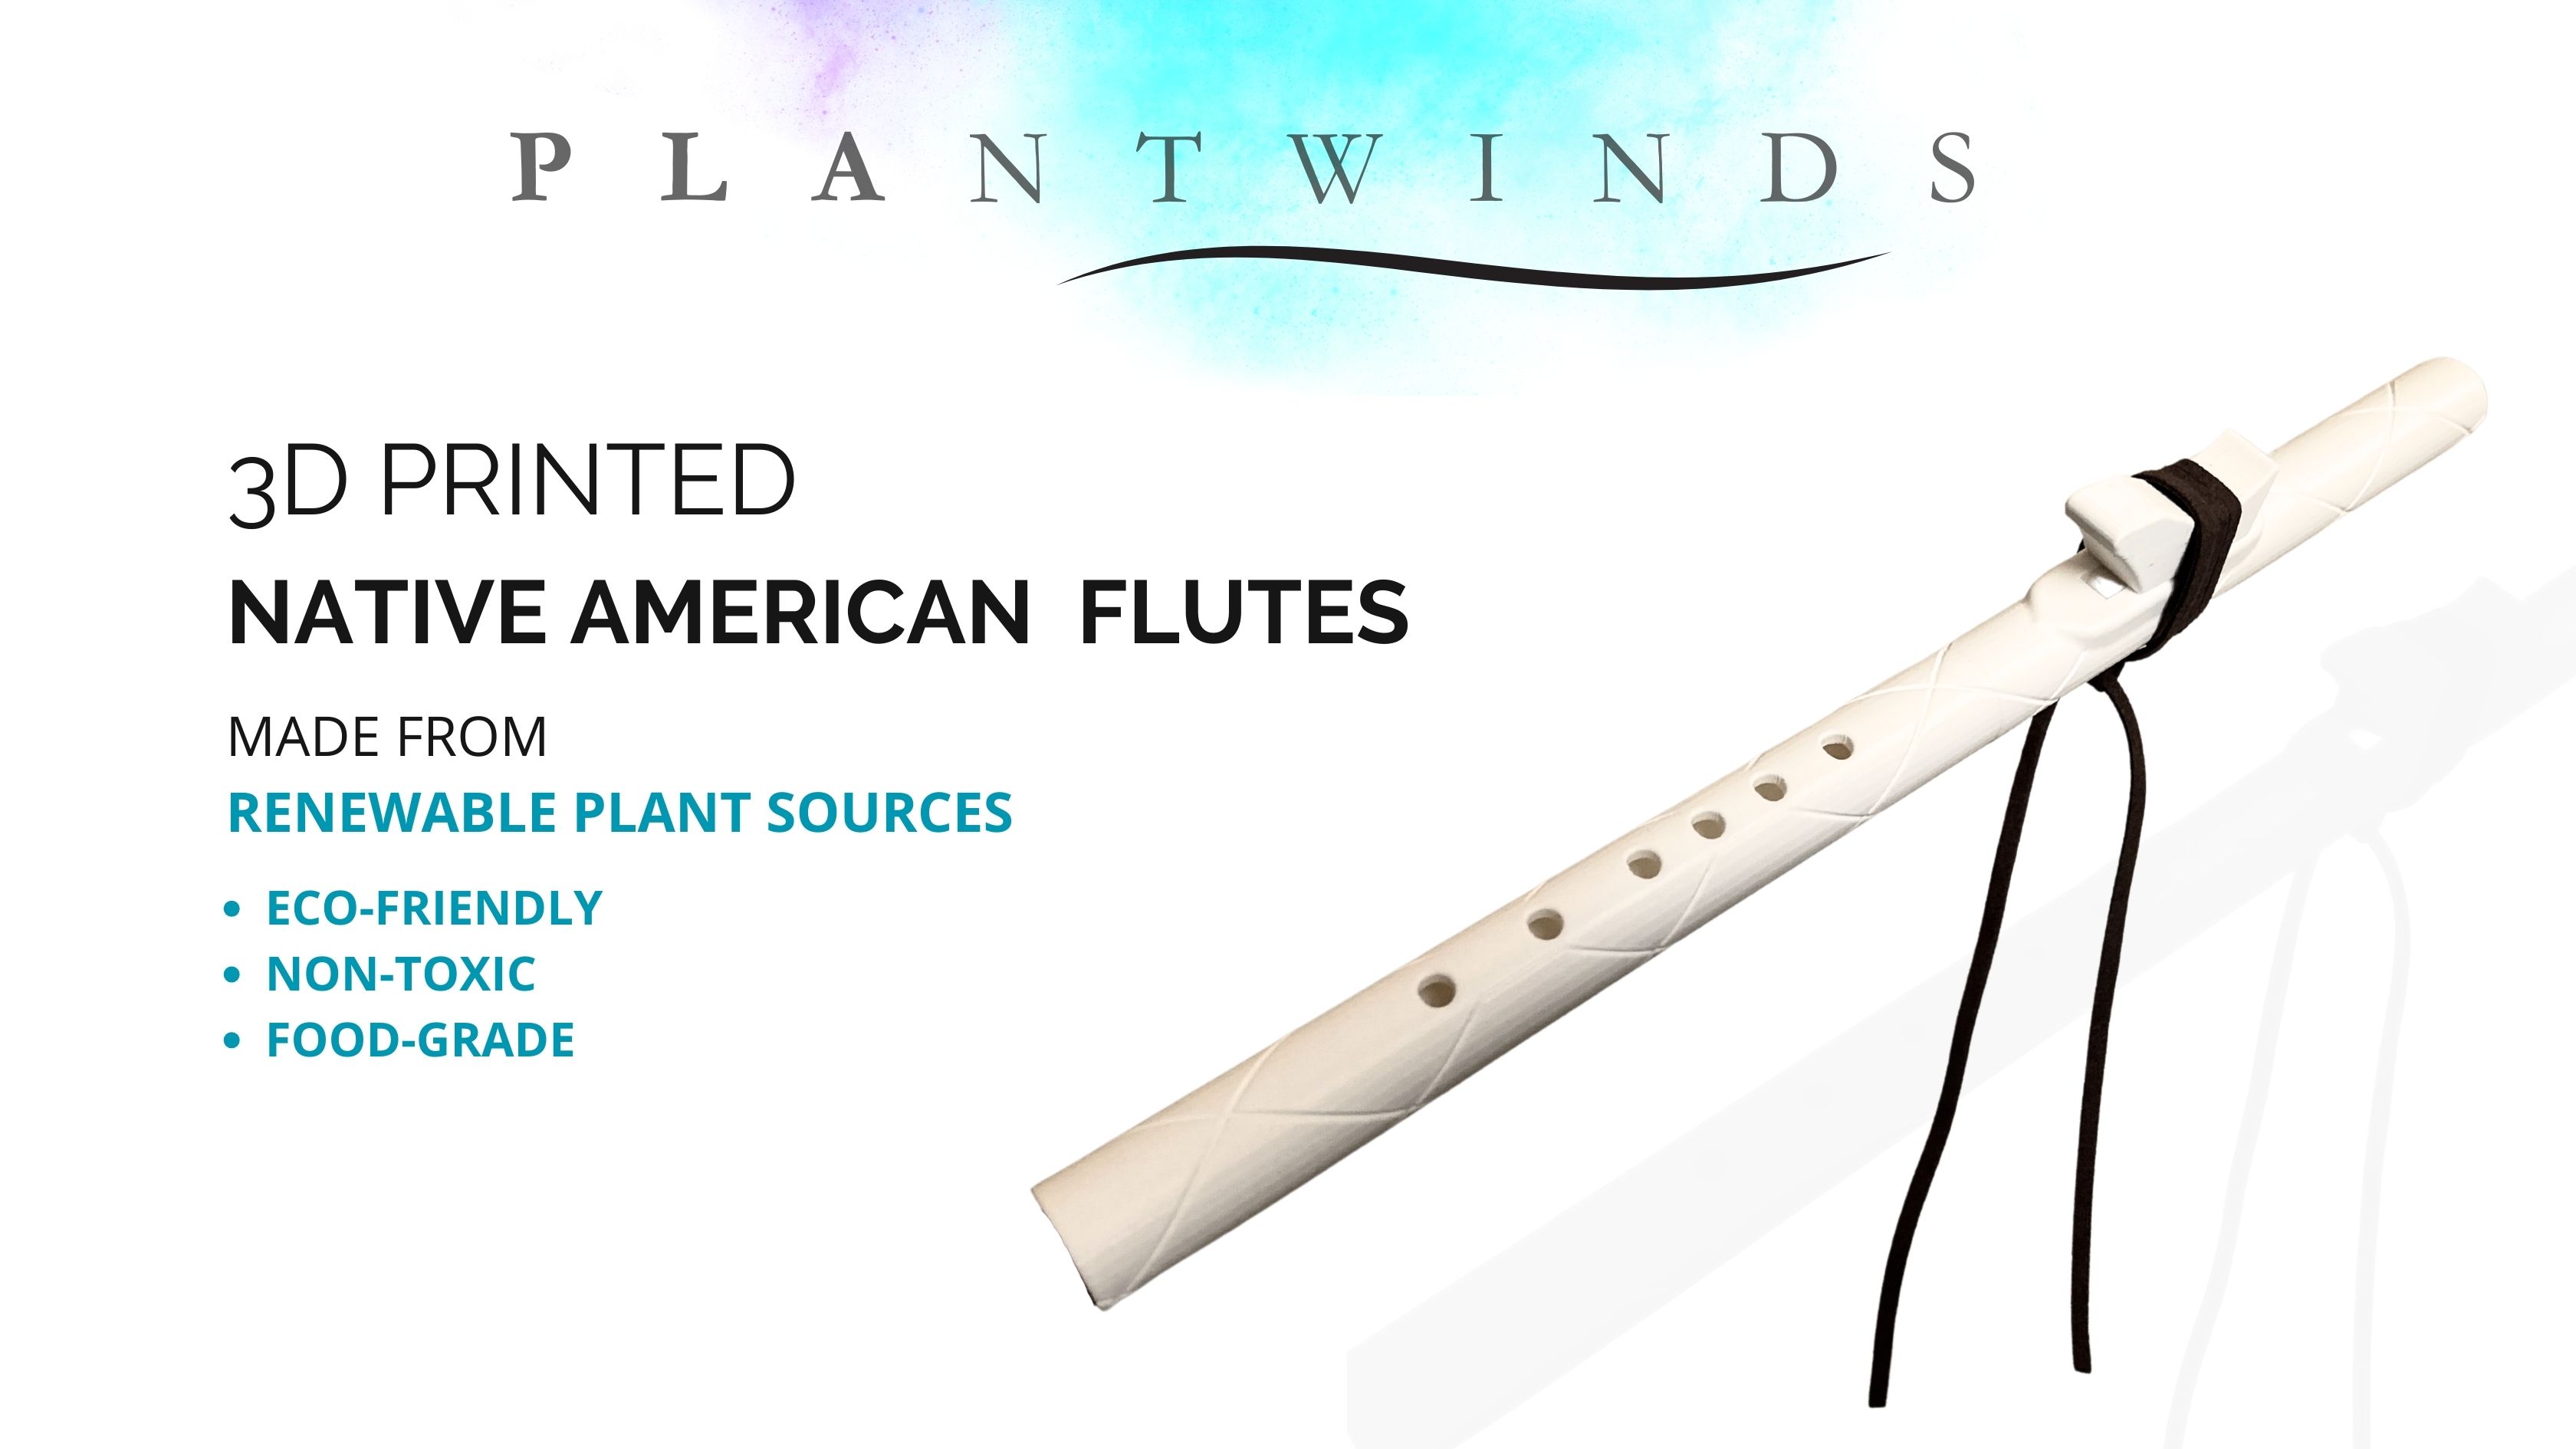 Play The Native American Flute in 90 Minutes- Plantwinds Workshop